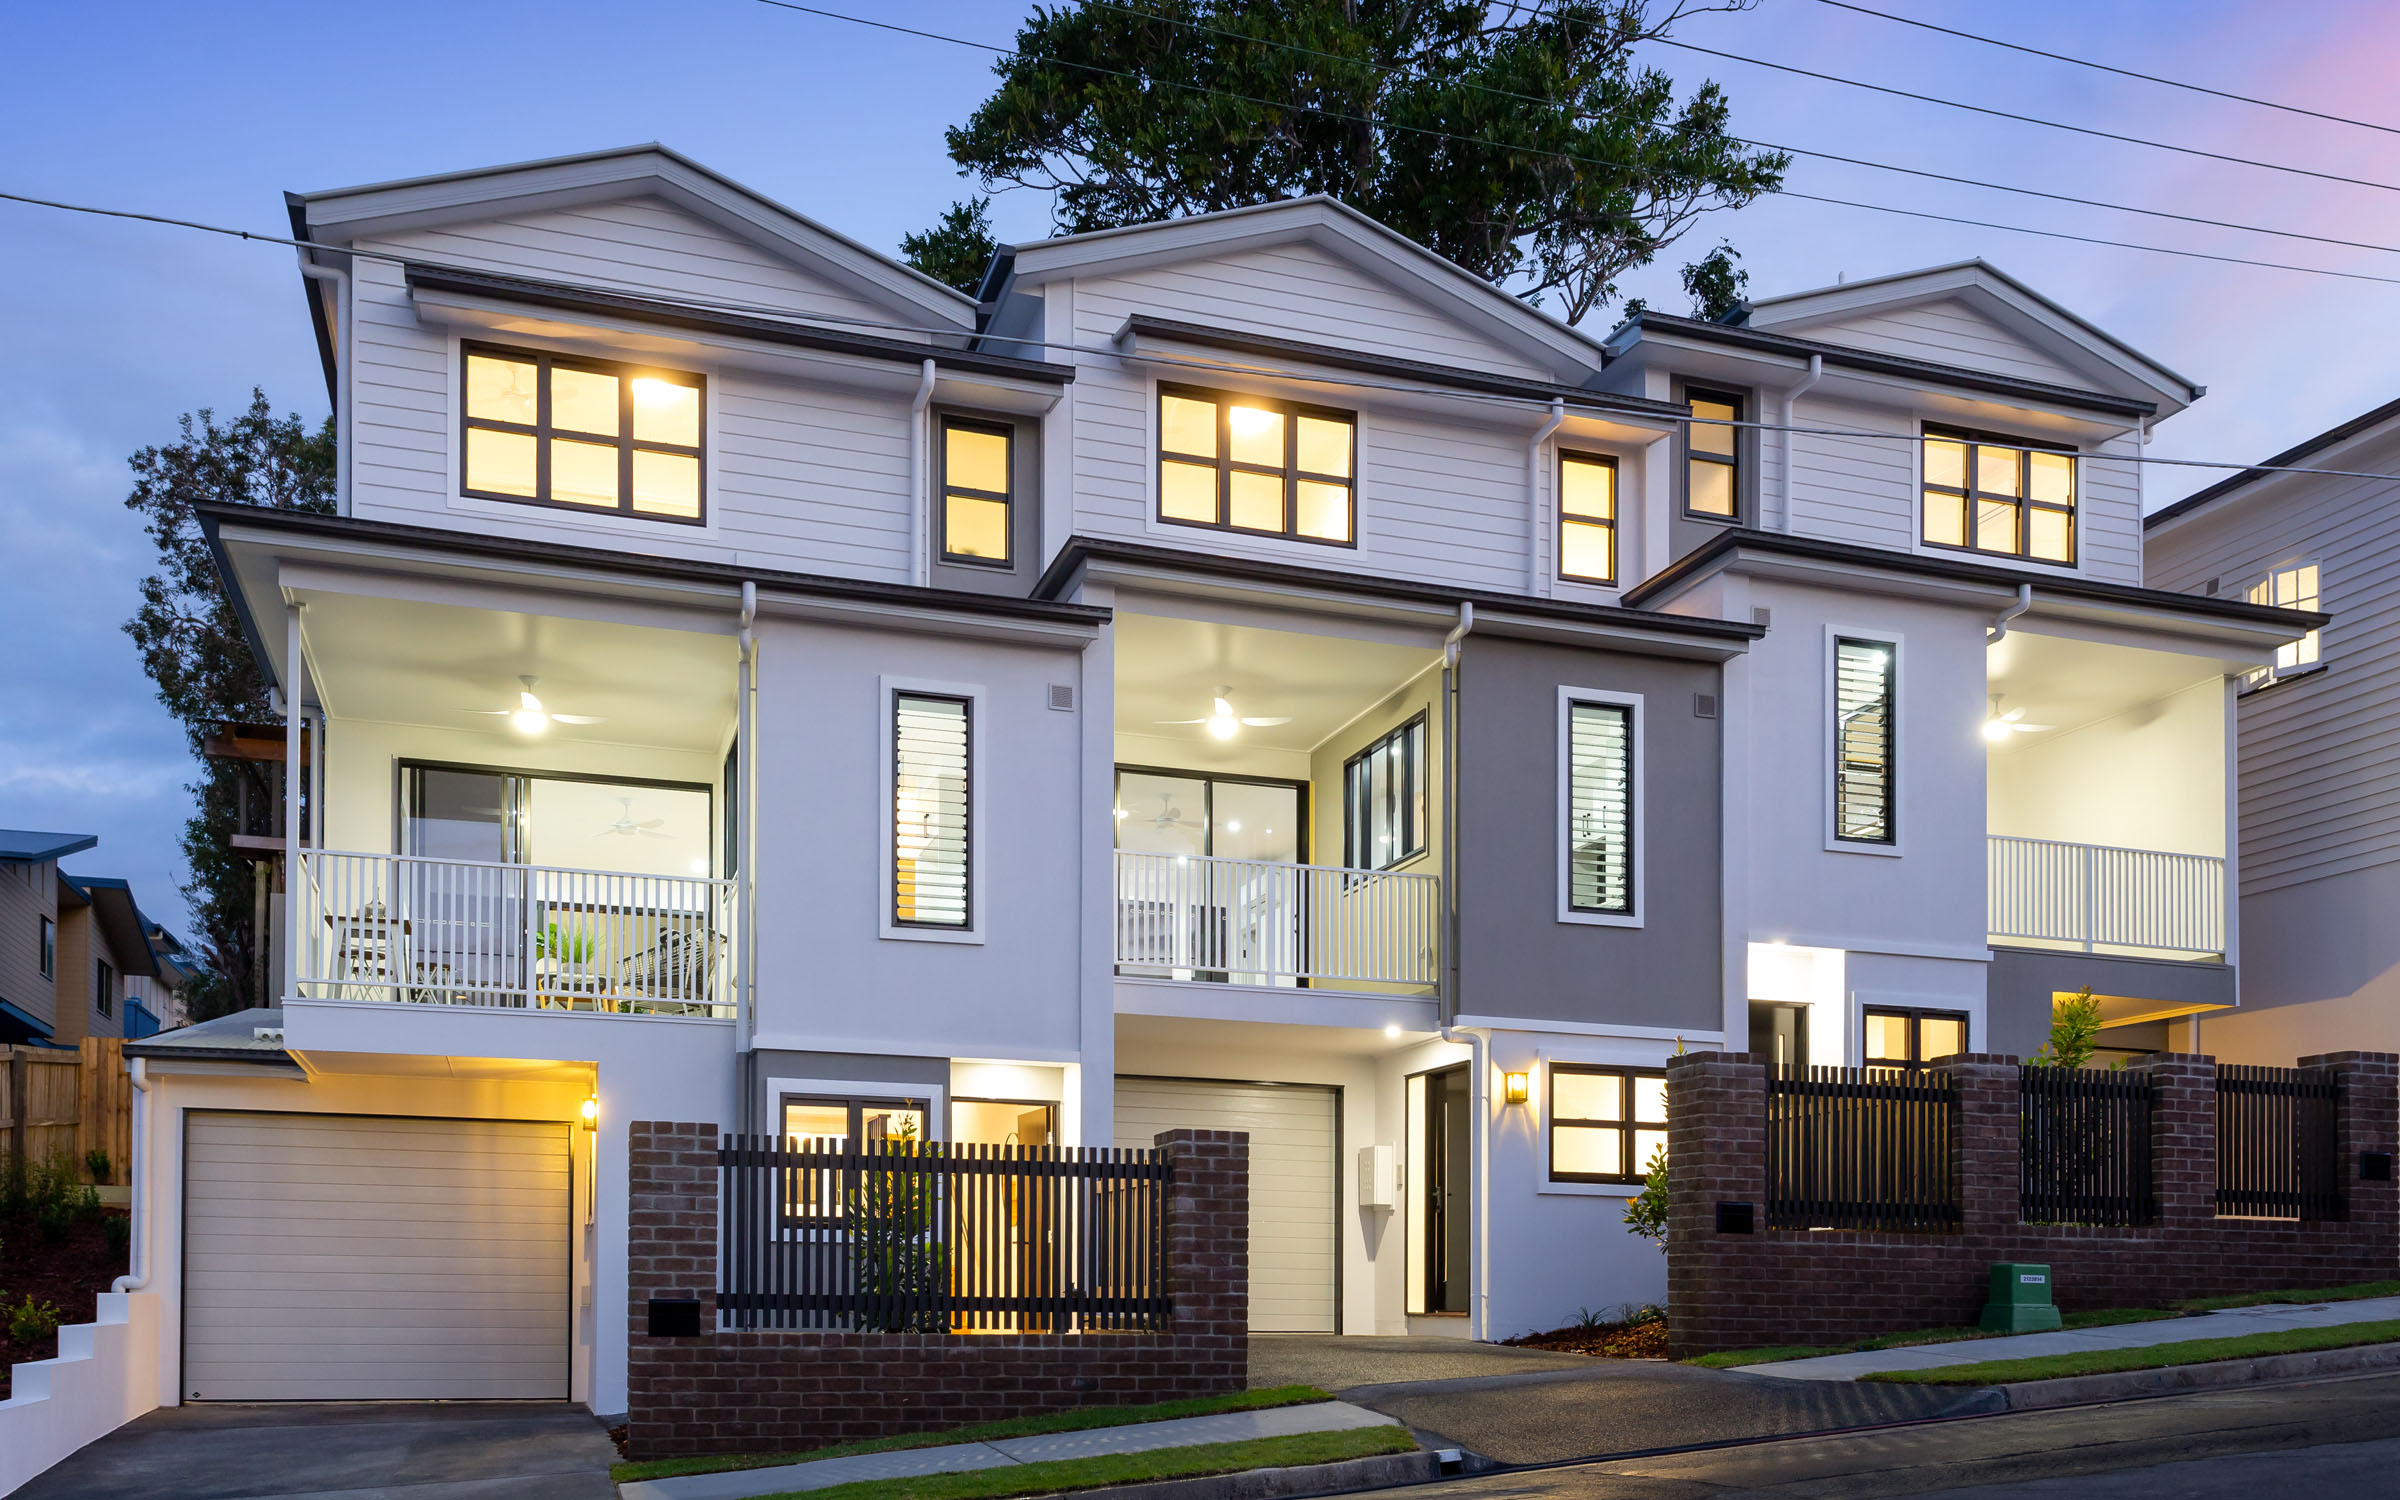 Town houses with side-by-side party wall systems.